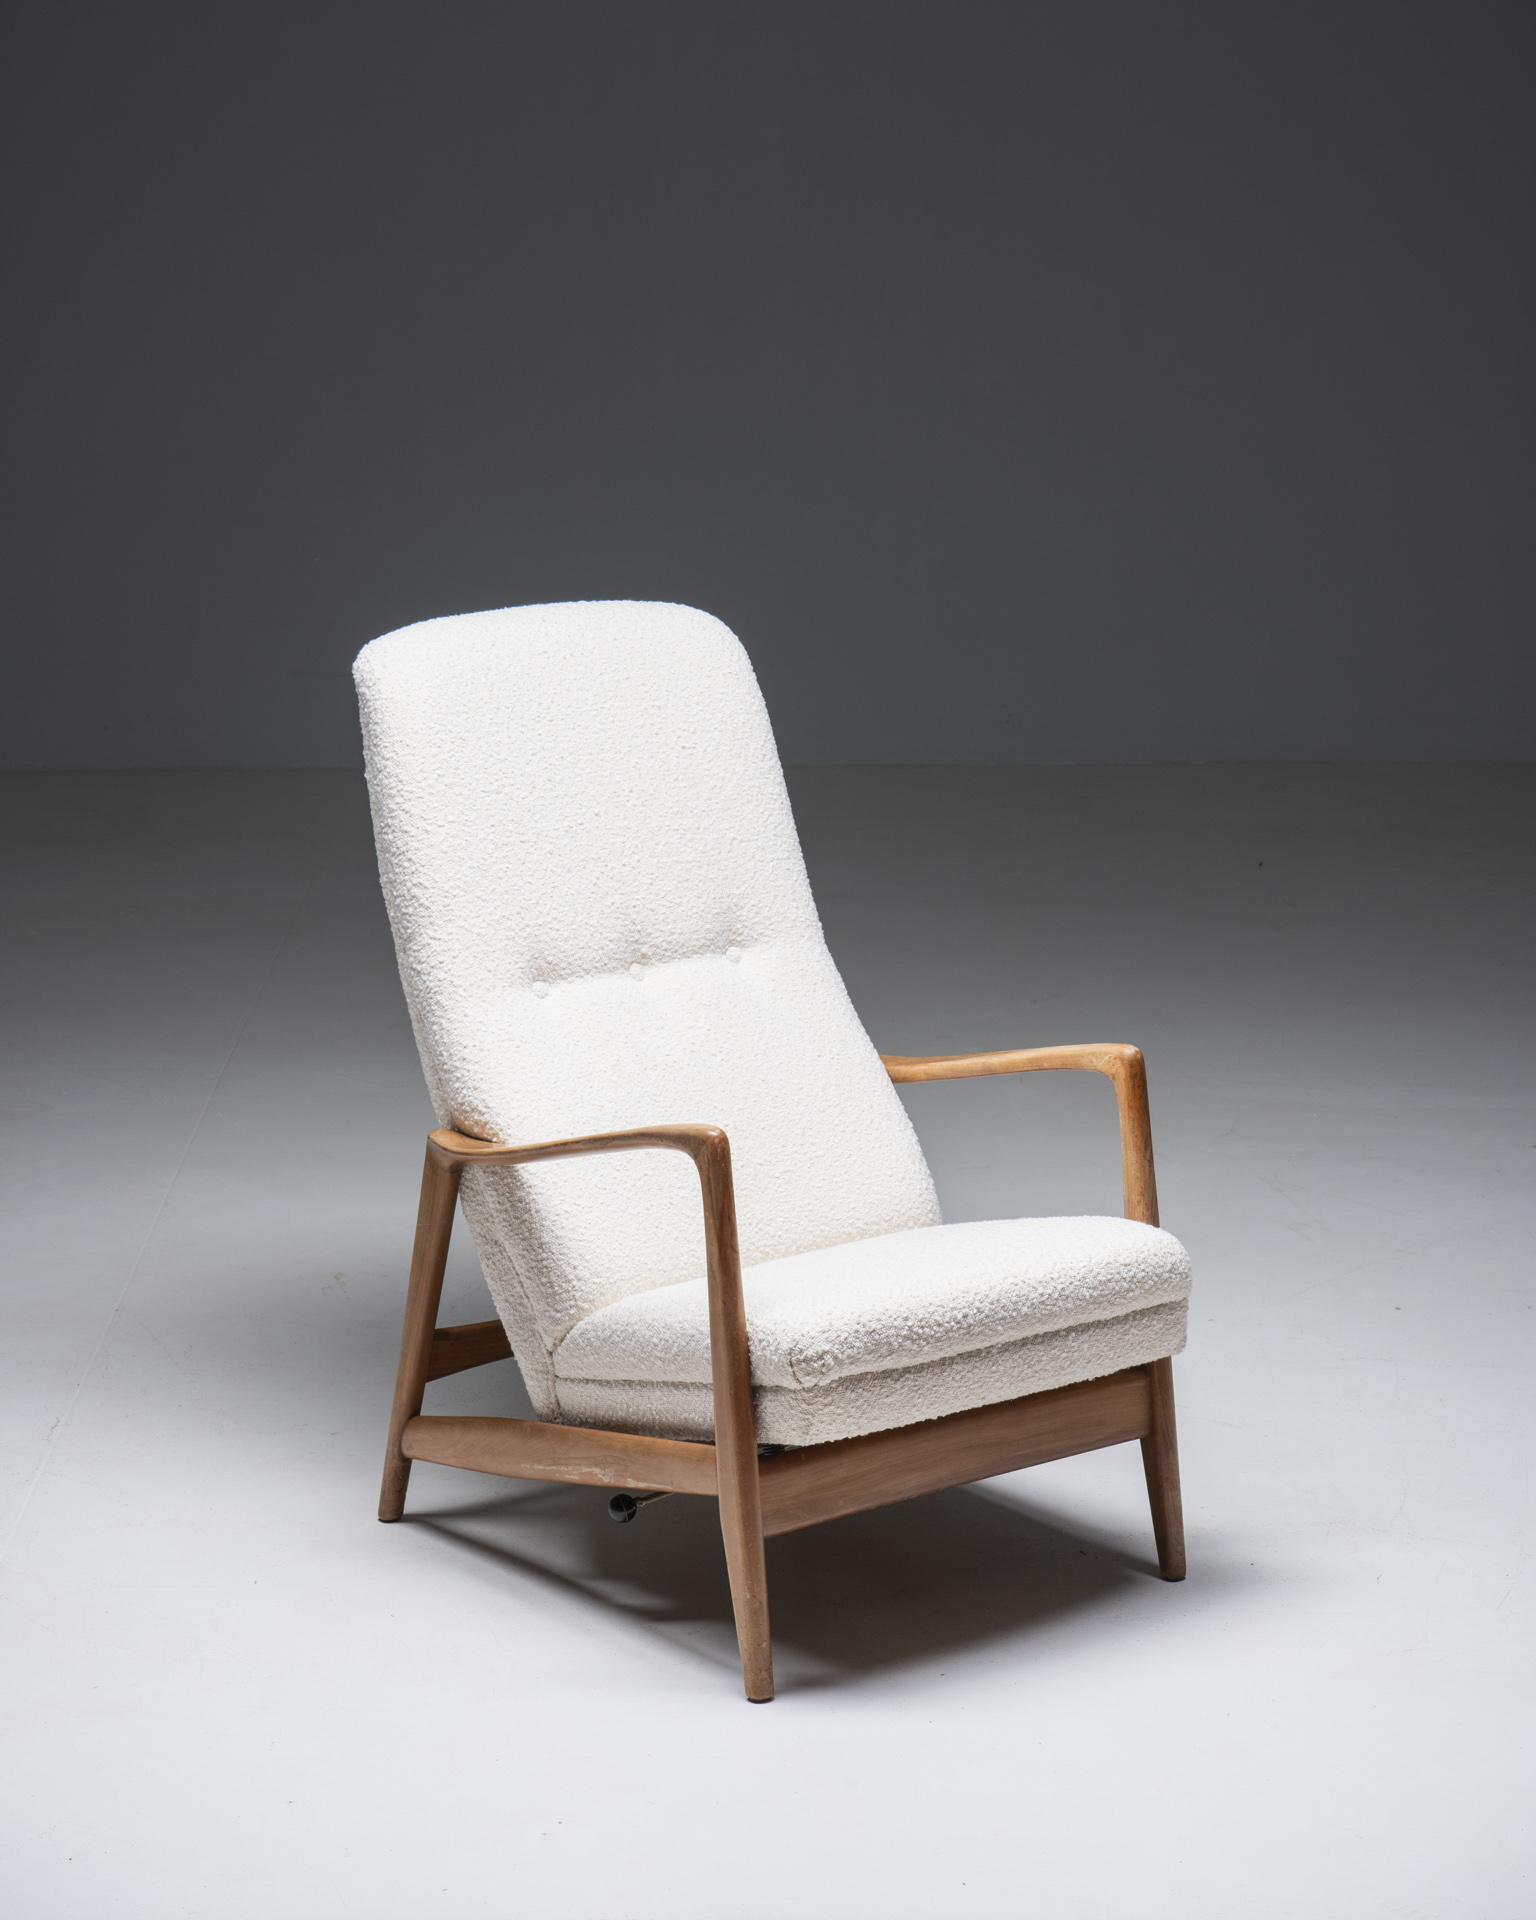 2425lounge-chair-gio-ponti-cassina-model-8290a0a-2_1